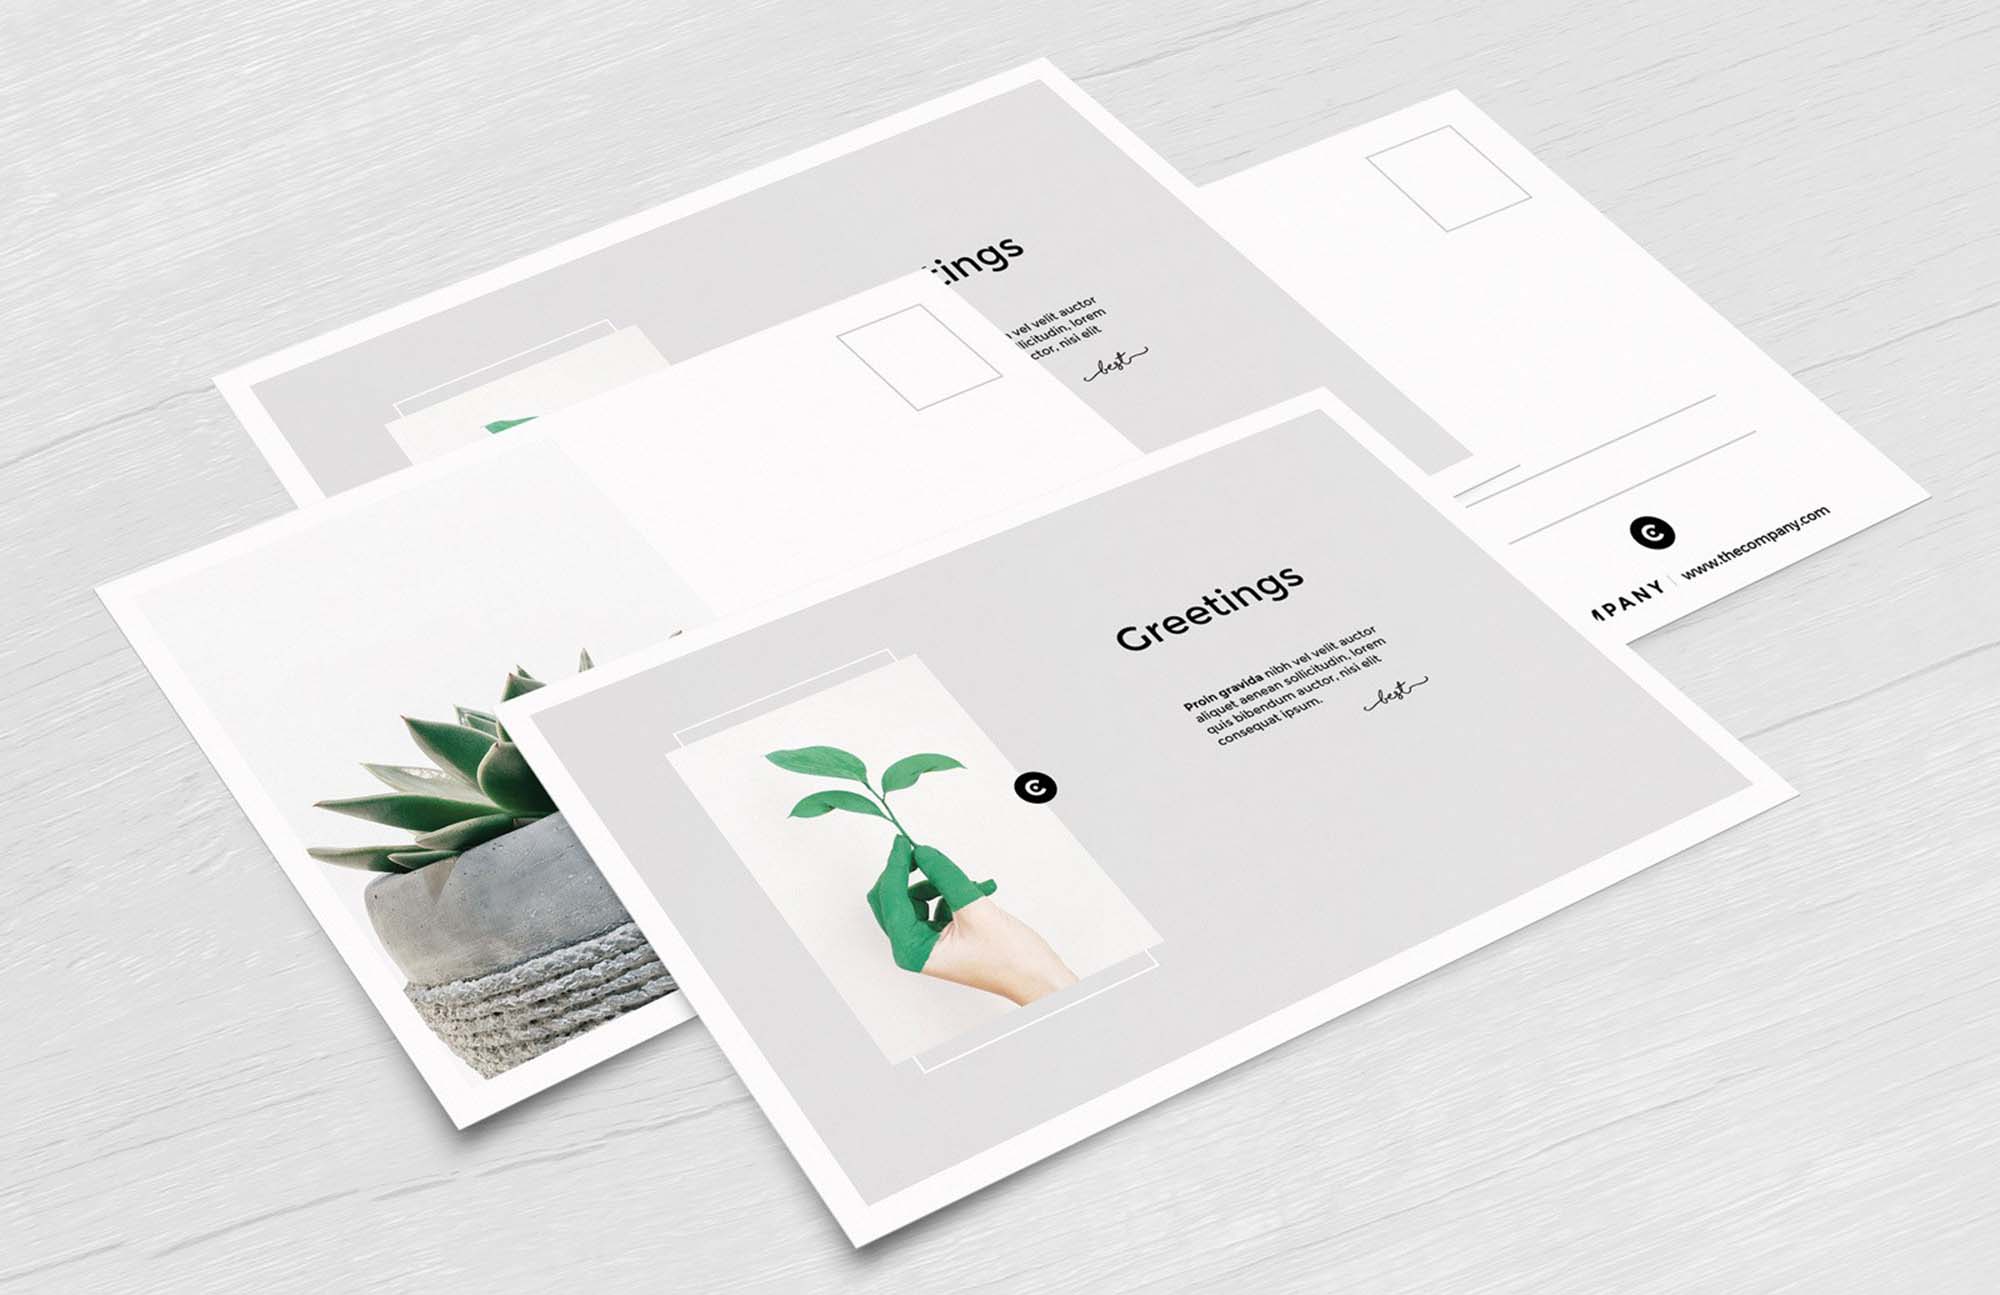 Download 35 Awesome Postcard Psd Mockup Templates Decolore Net